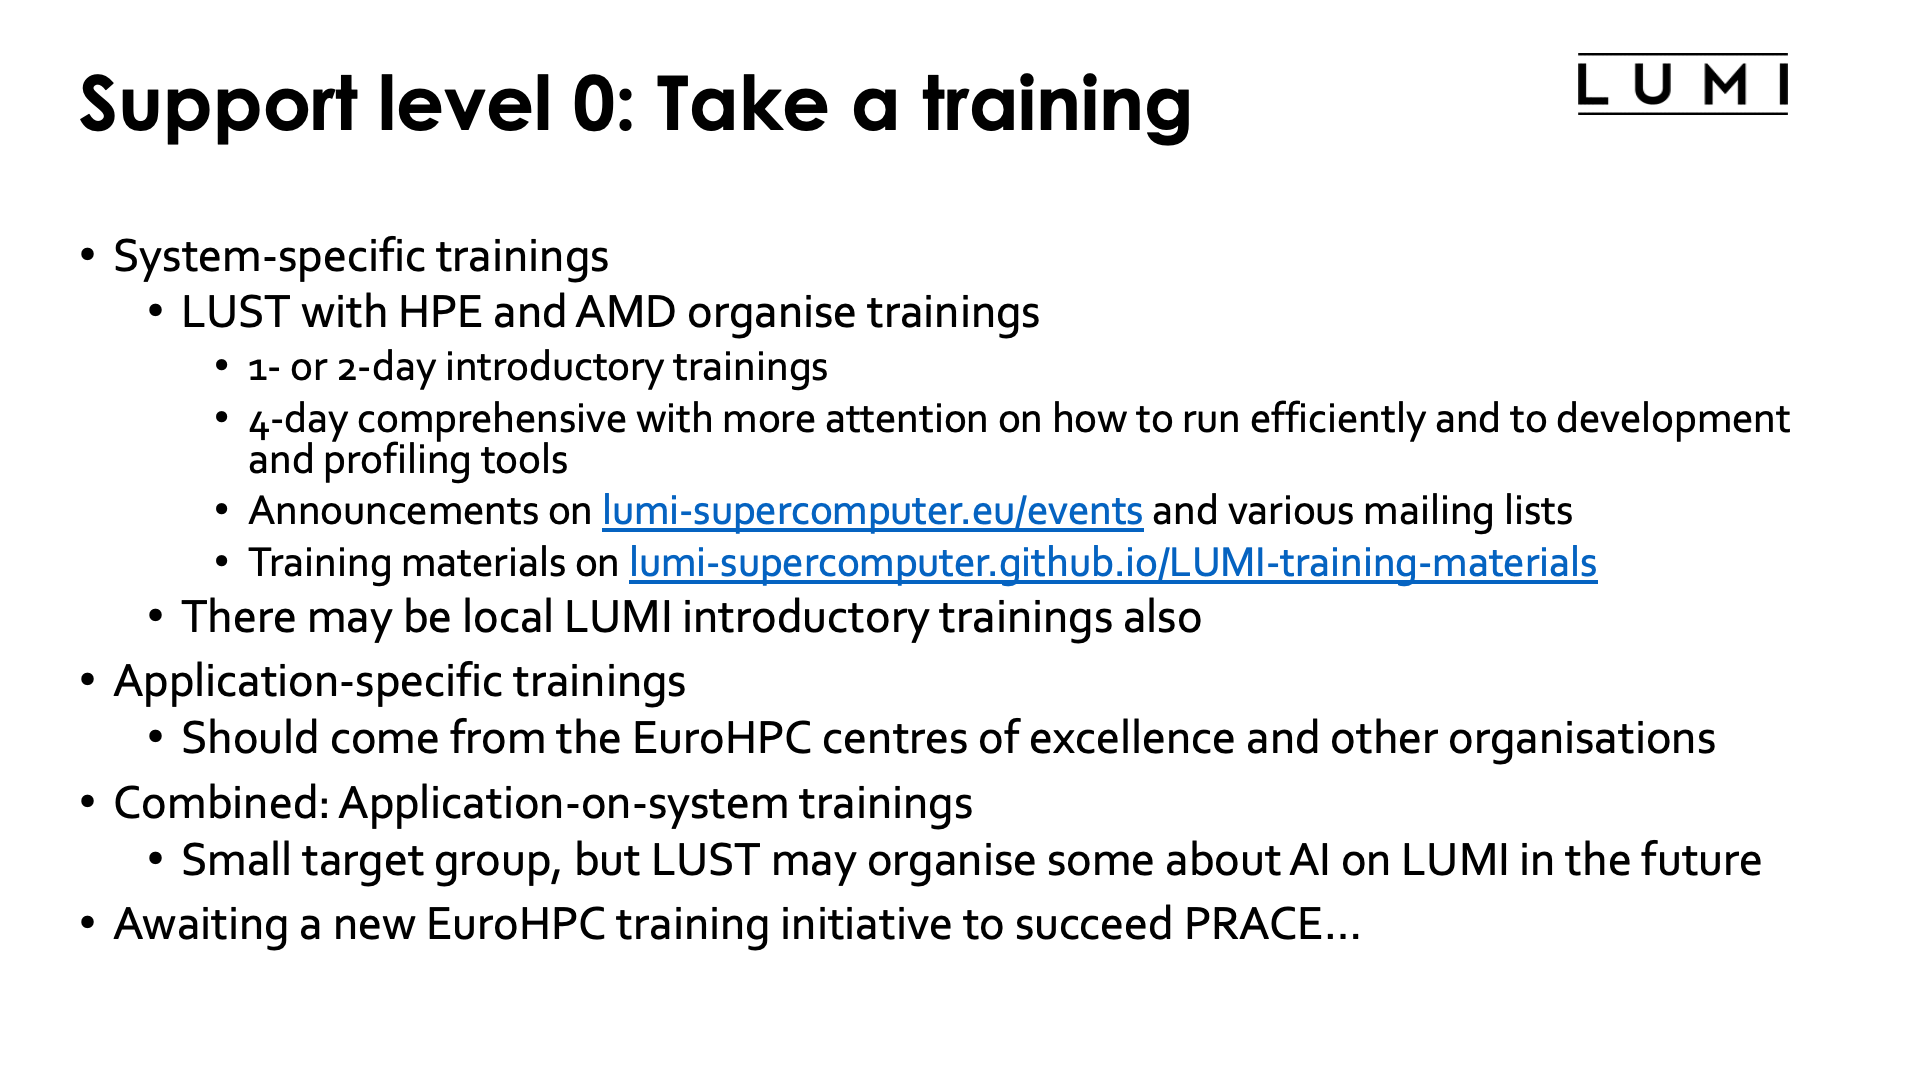 L0 support: Take a training!